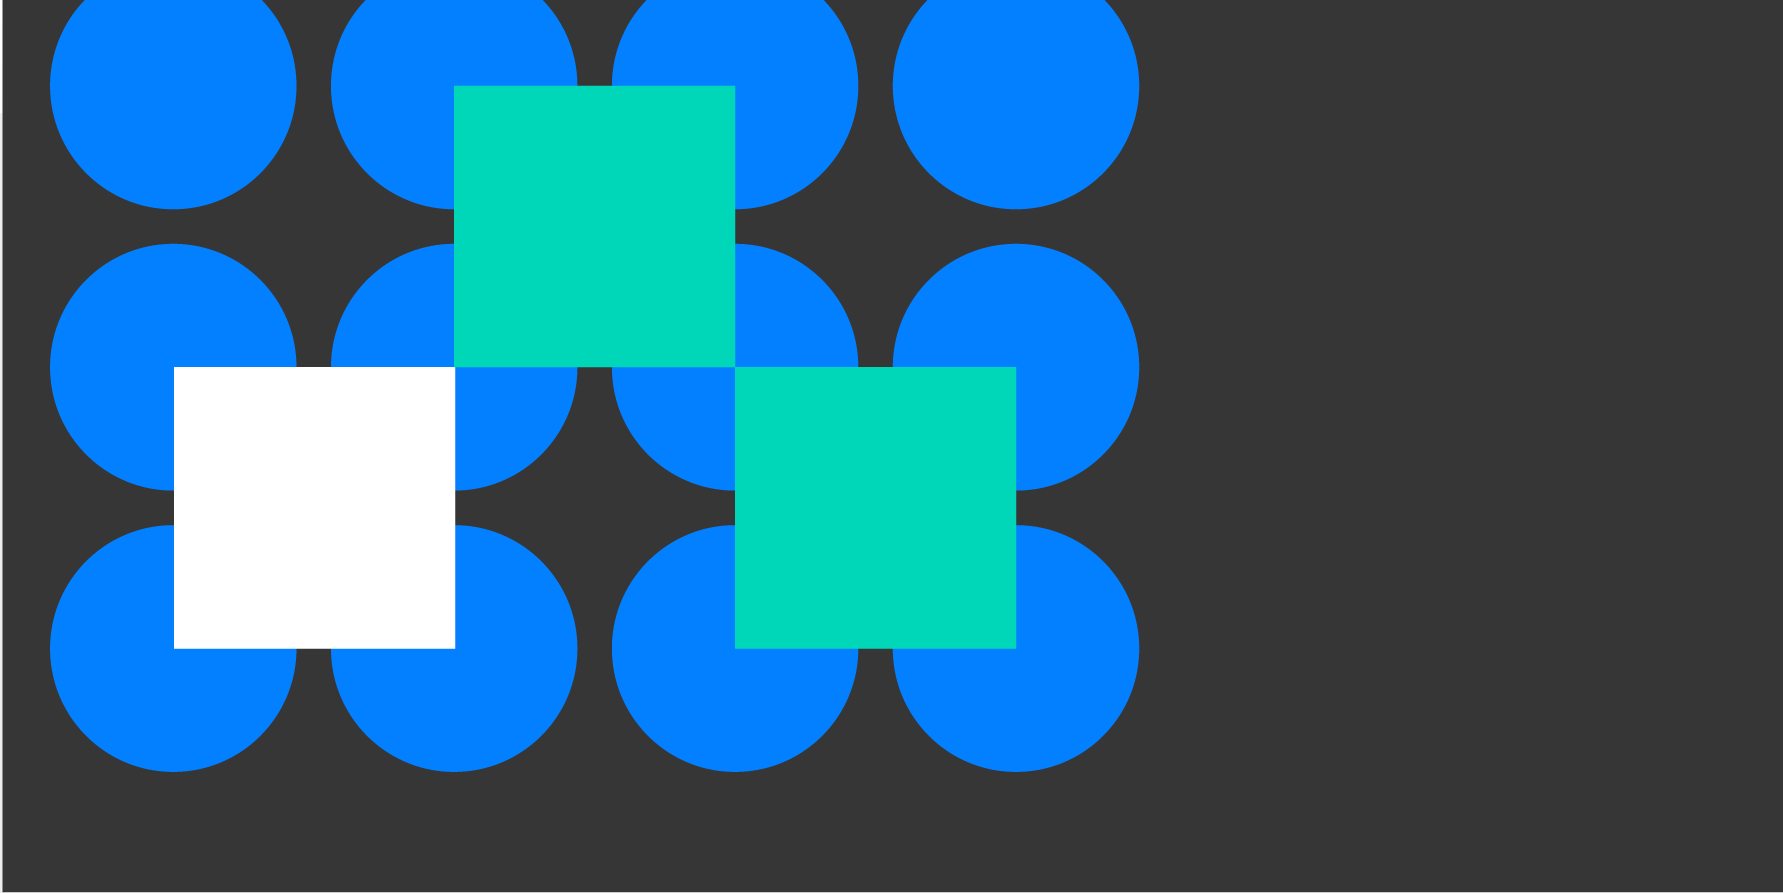 Three squares overlapping a grid of blue circles on a black background